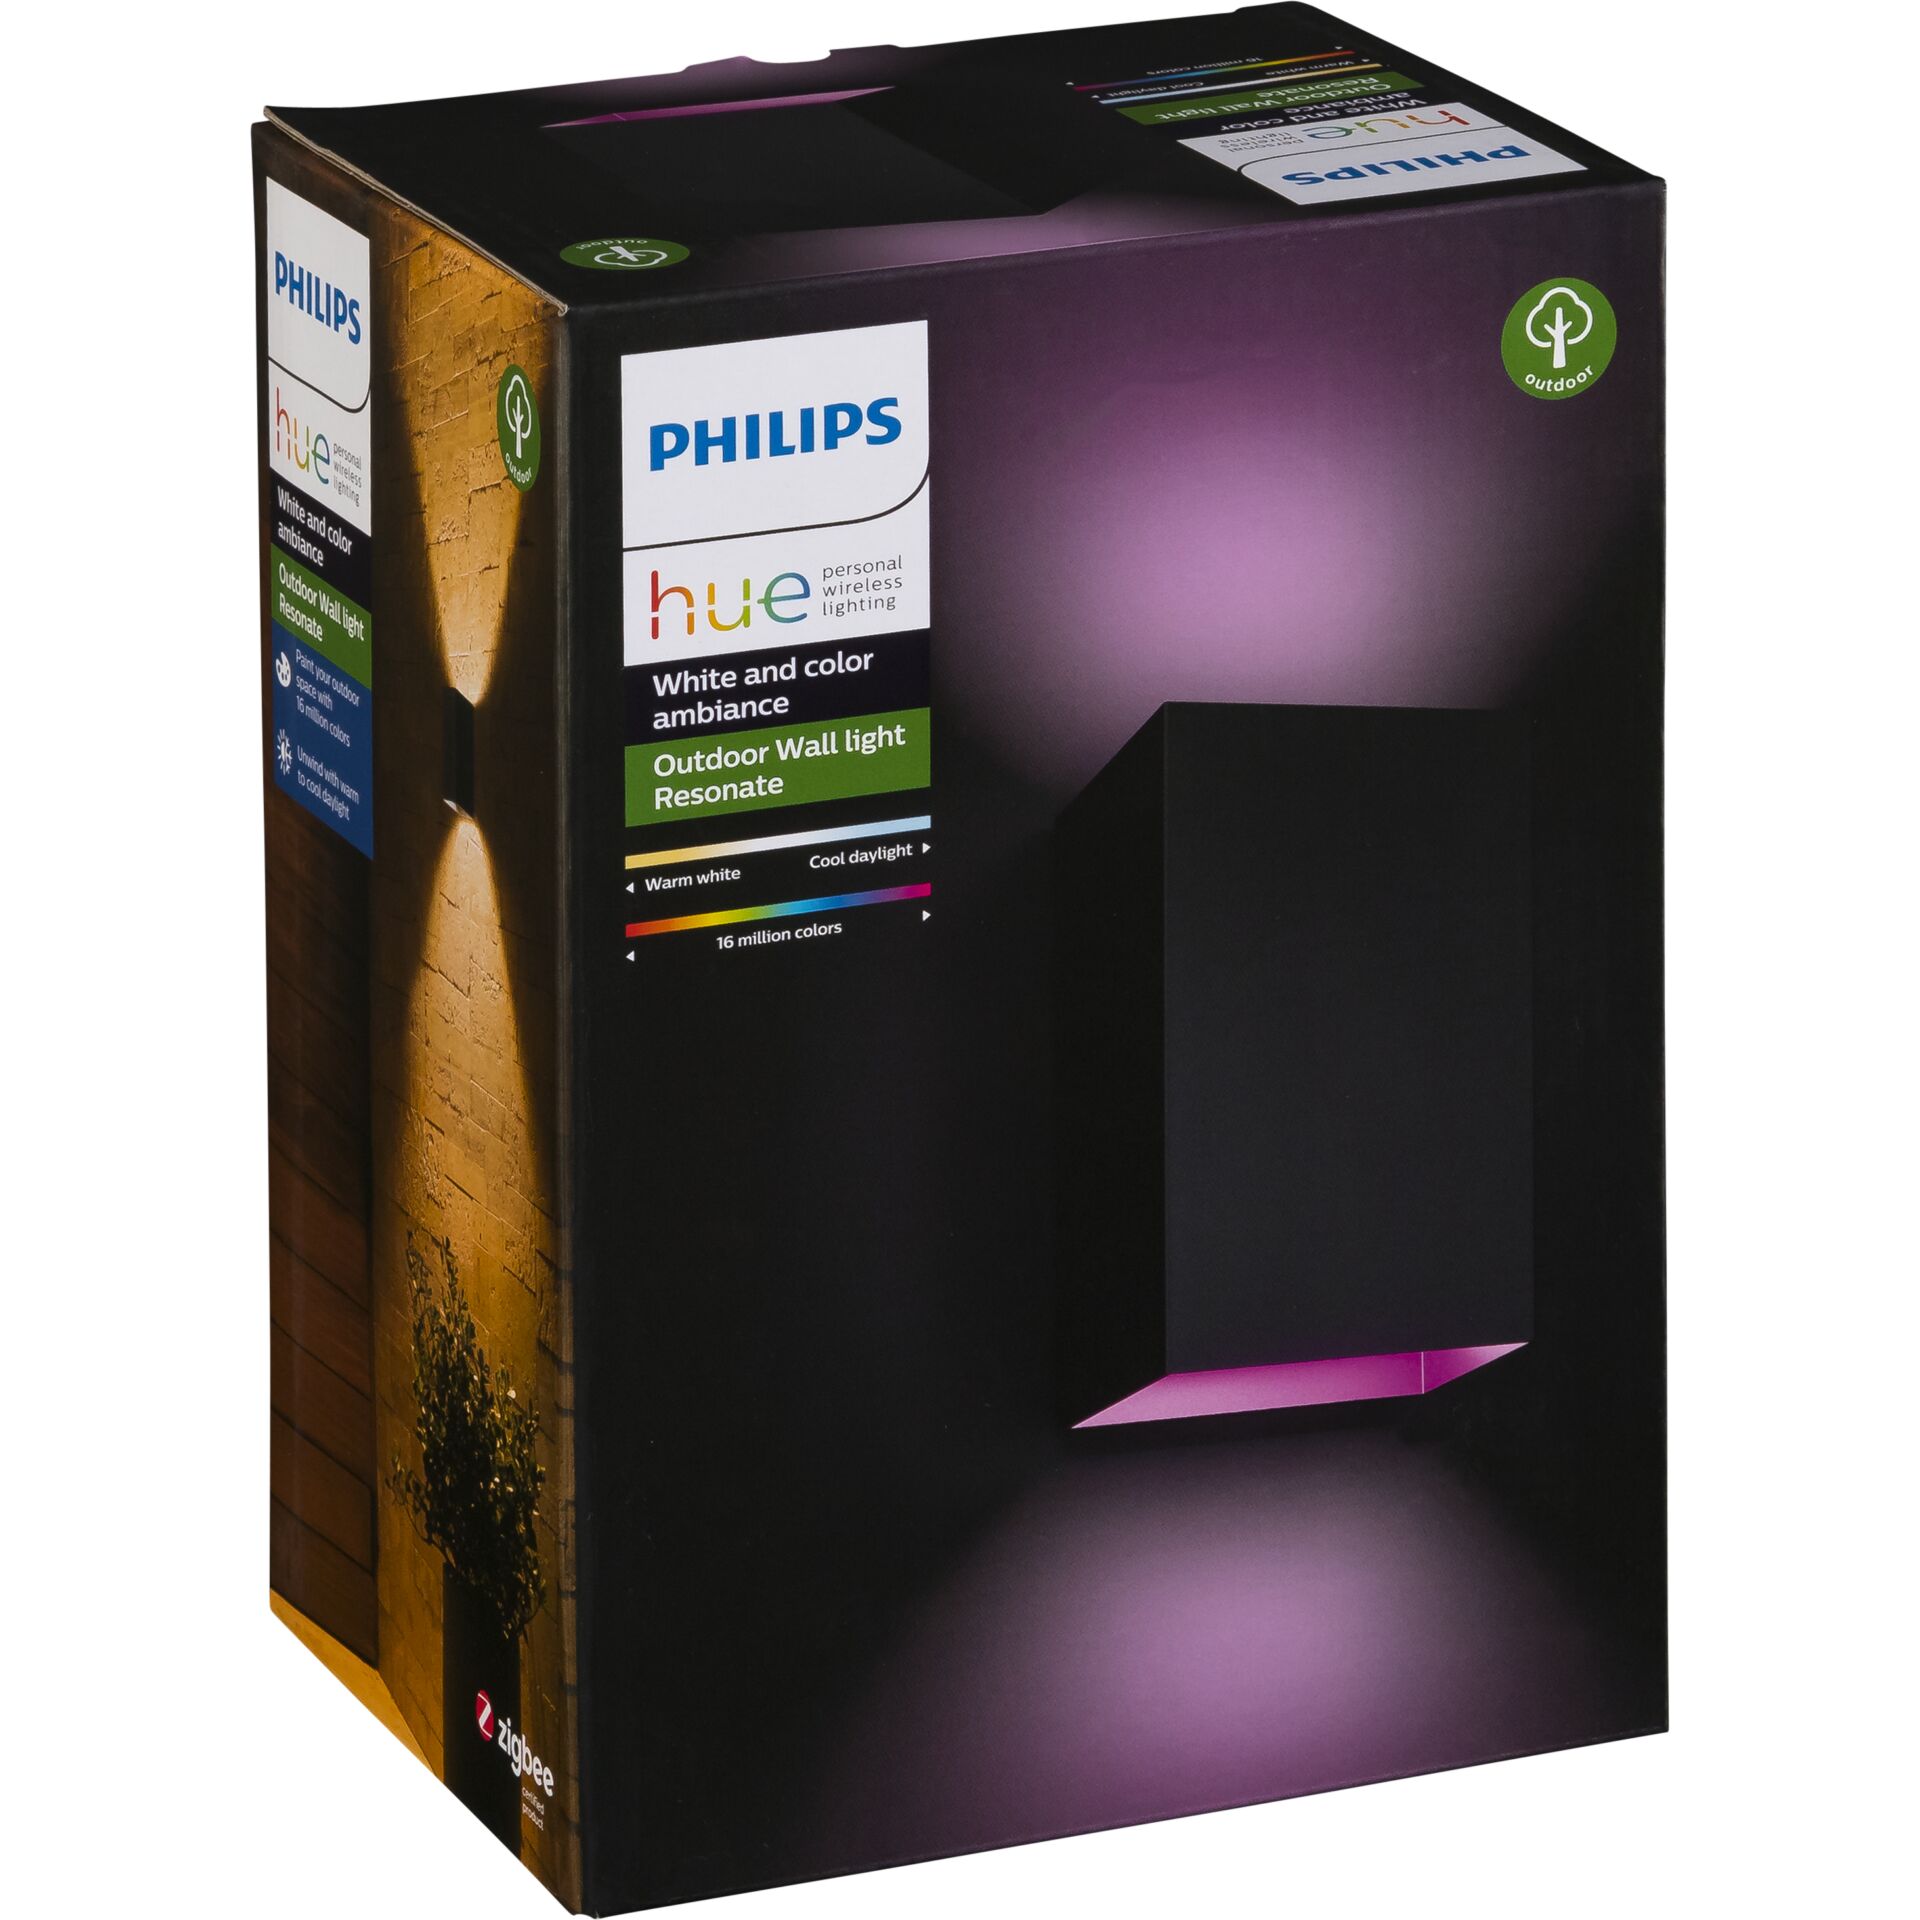 Philips Hue White and Color Ambiance Resonate Væglampe 8W 2000-6500K 16 millioner farver